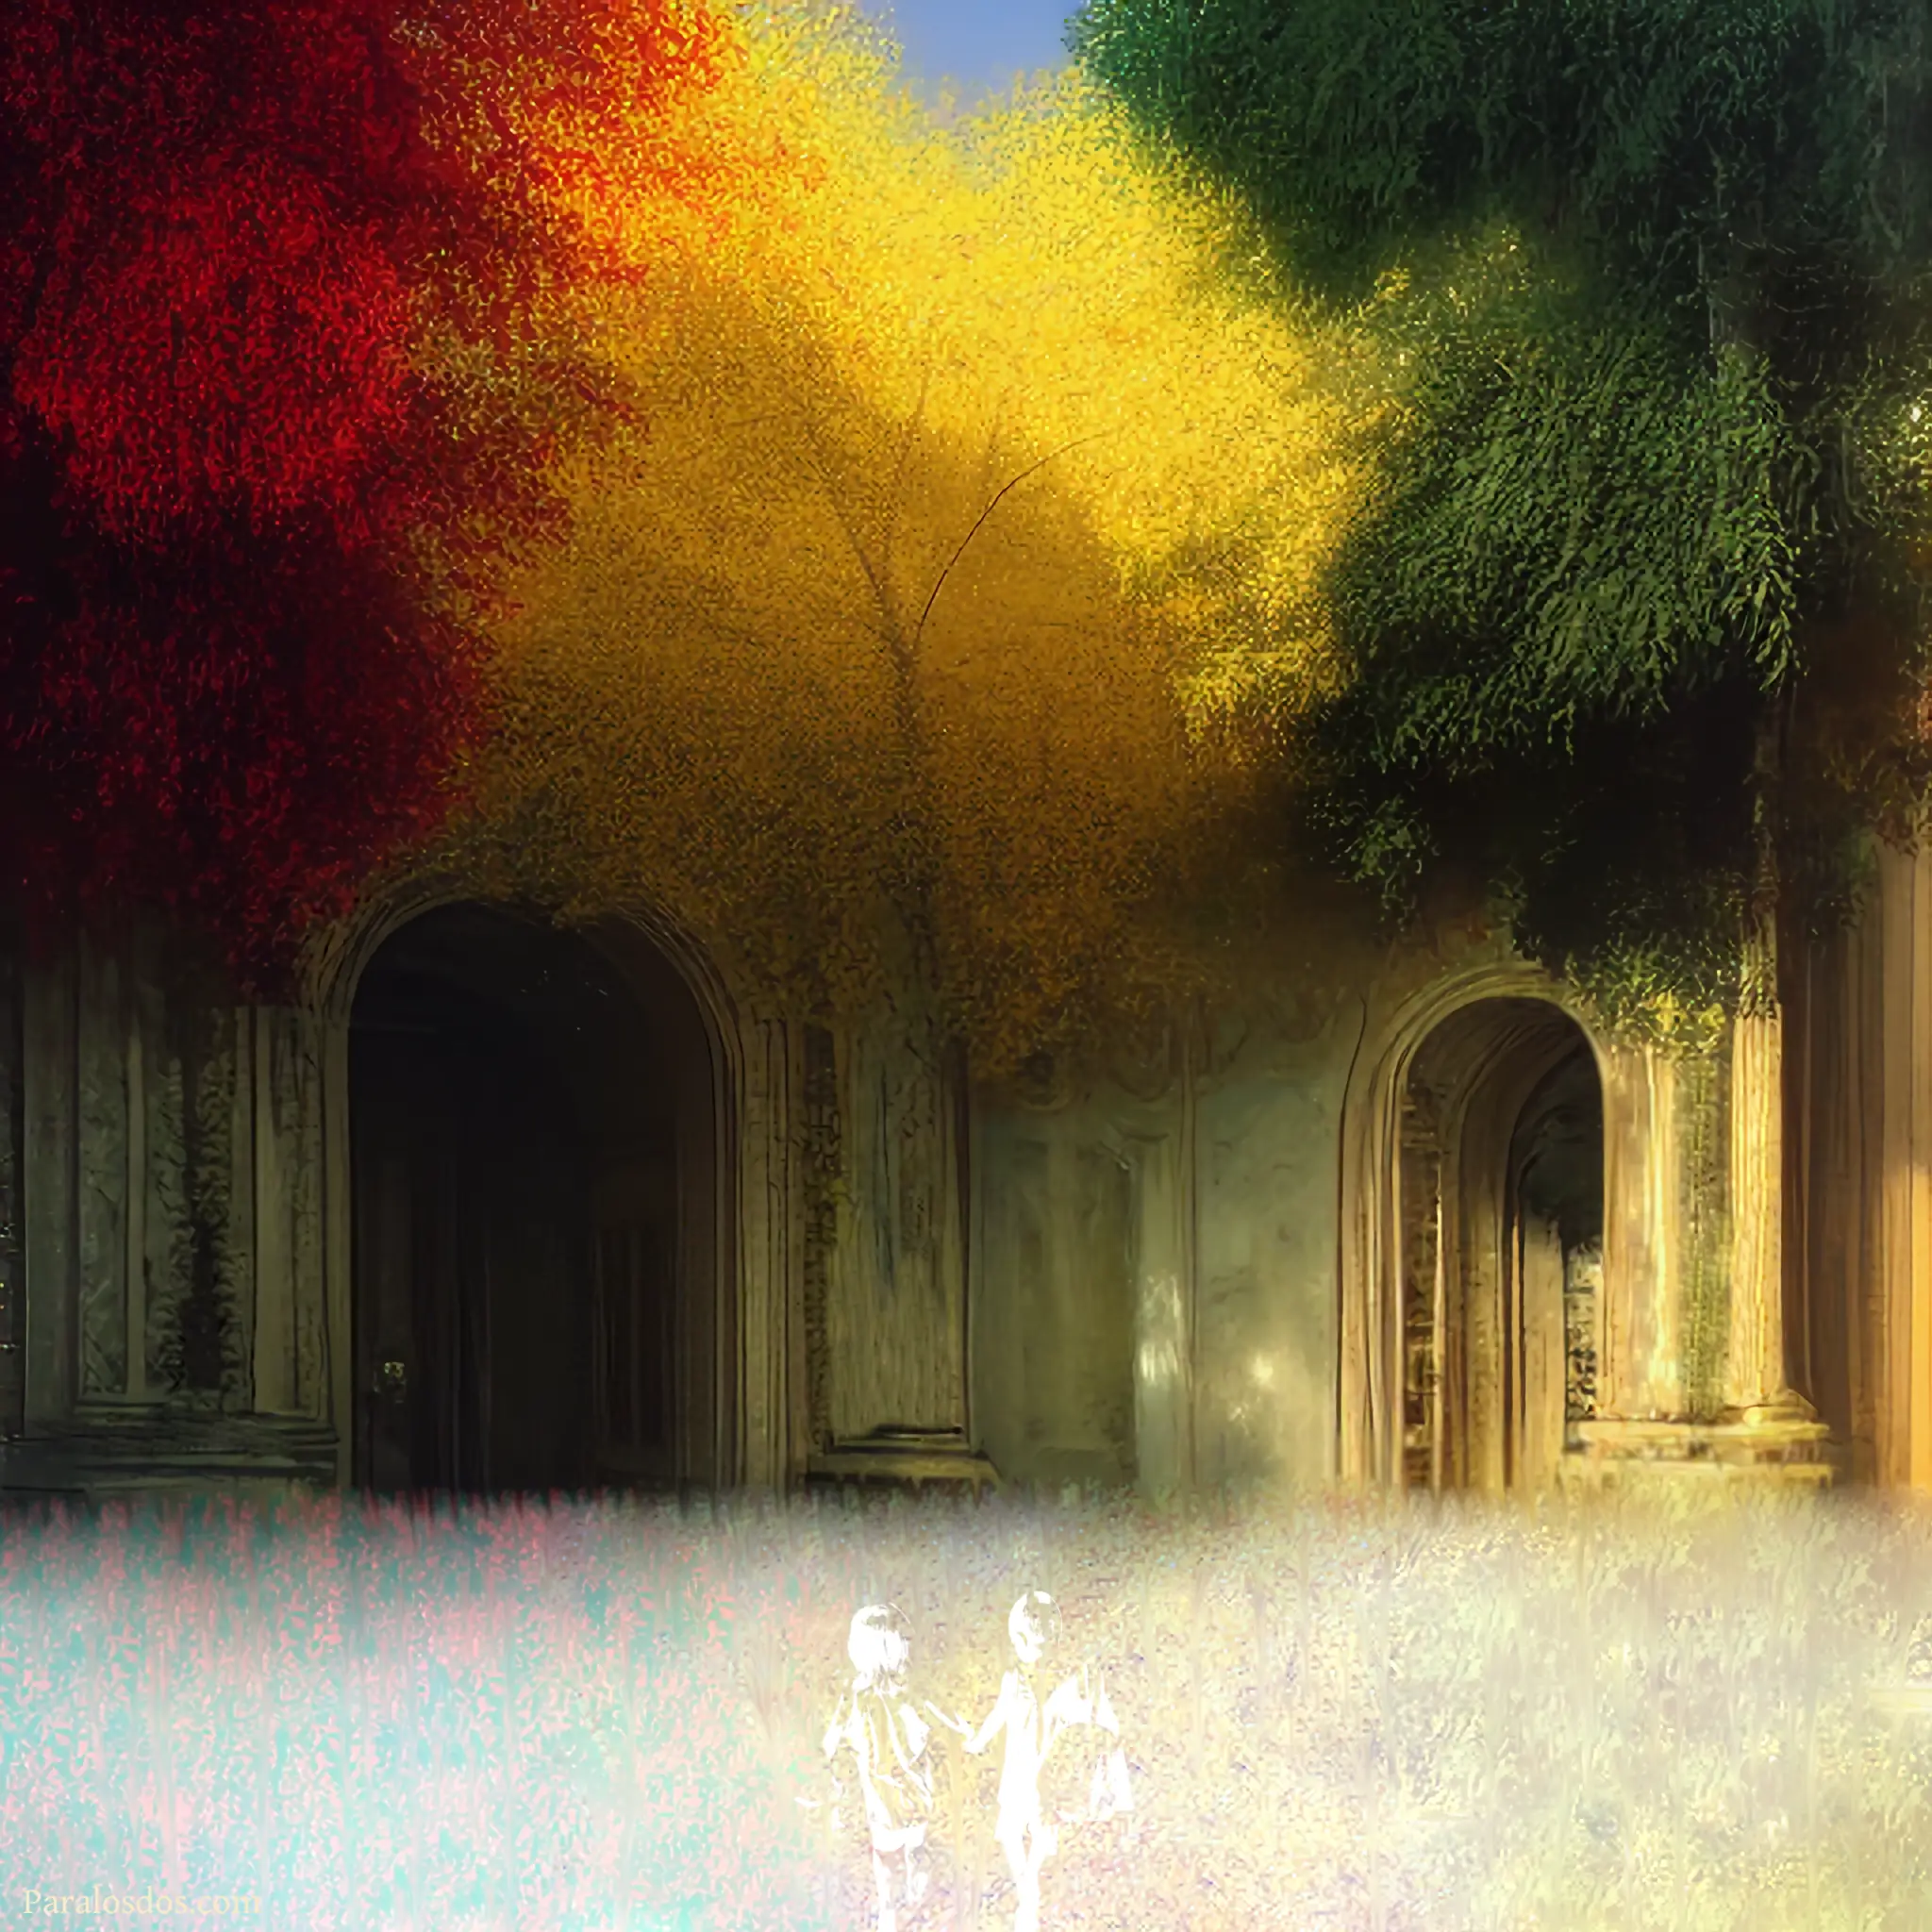 An artistic rendering of colourful trees clustered above doorways in a courtyard with overgrown and colourful grass.